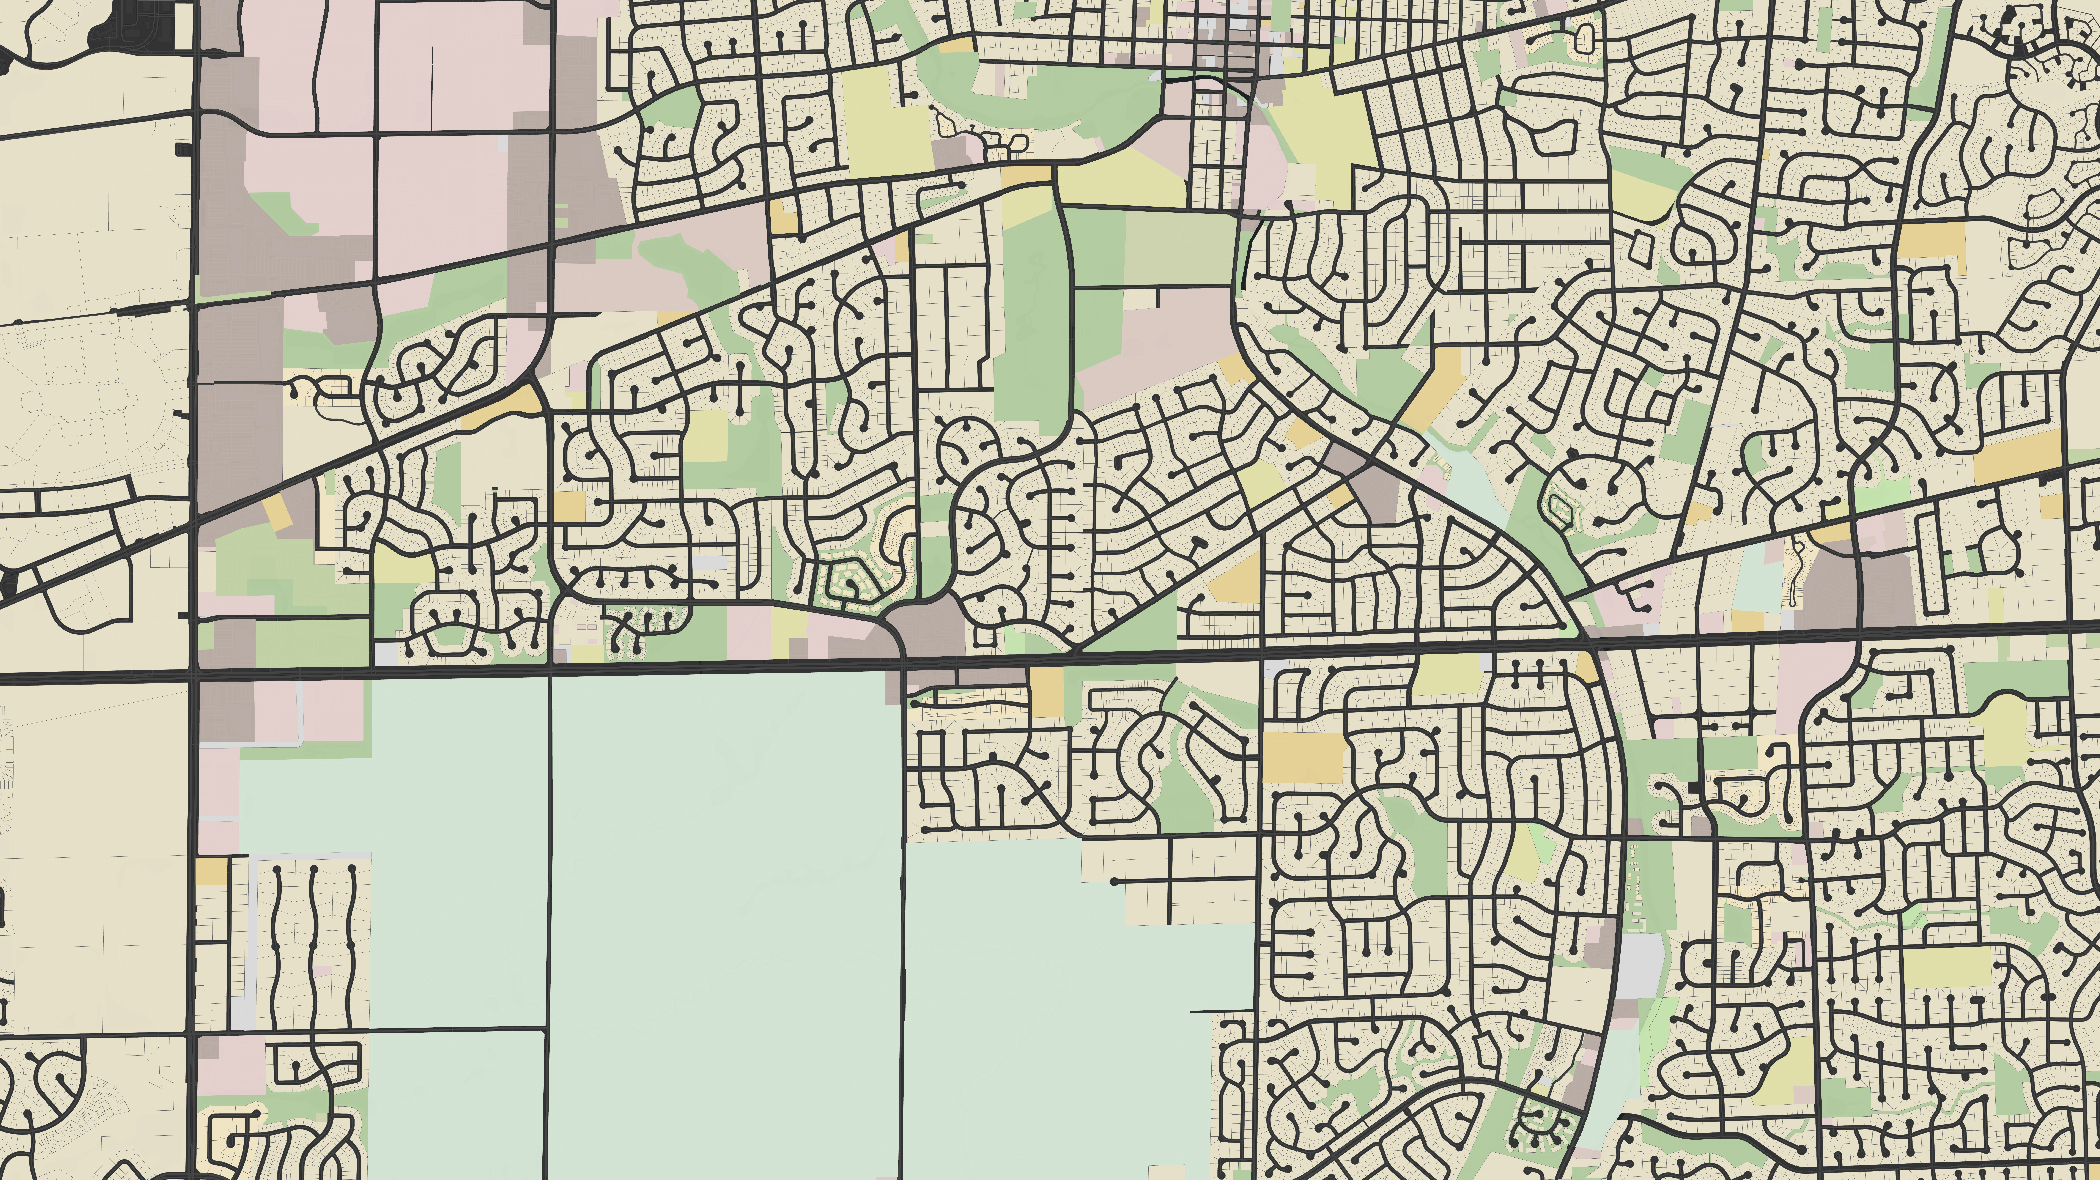 A section of a stylized city map showing streets, blocks, and land use with various colors indicating different zones.